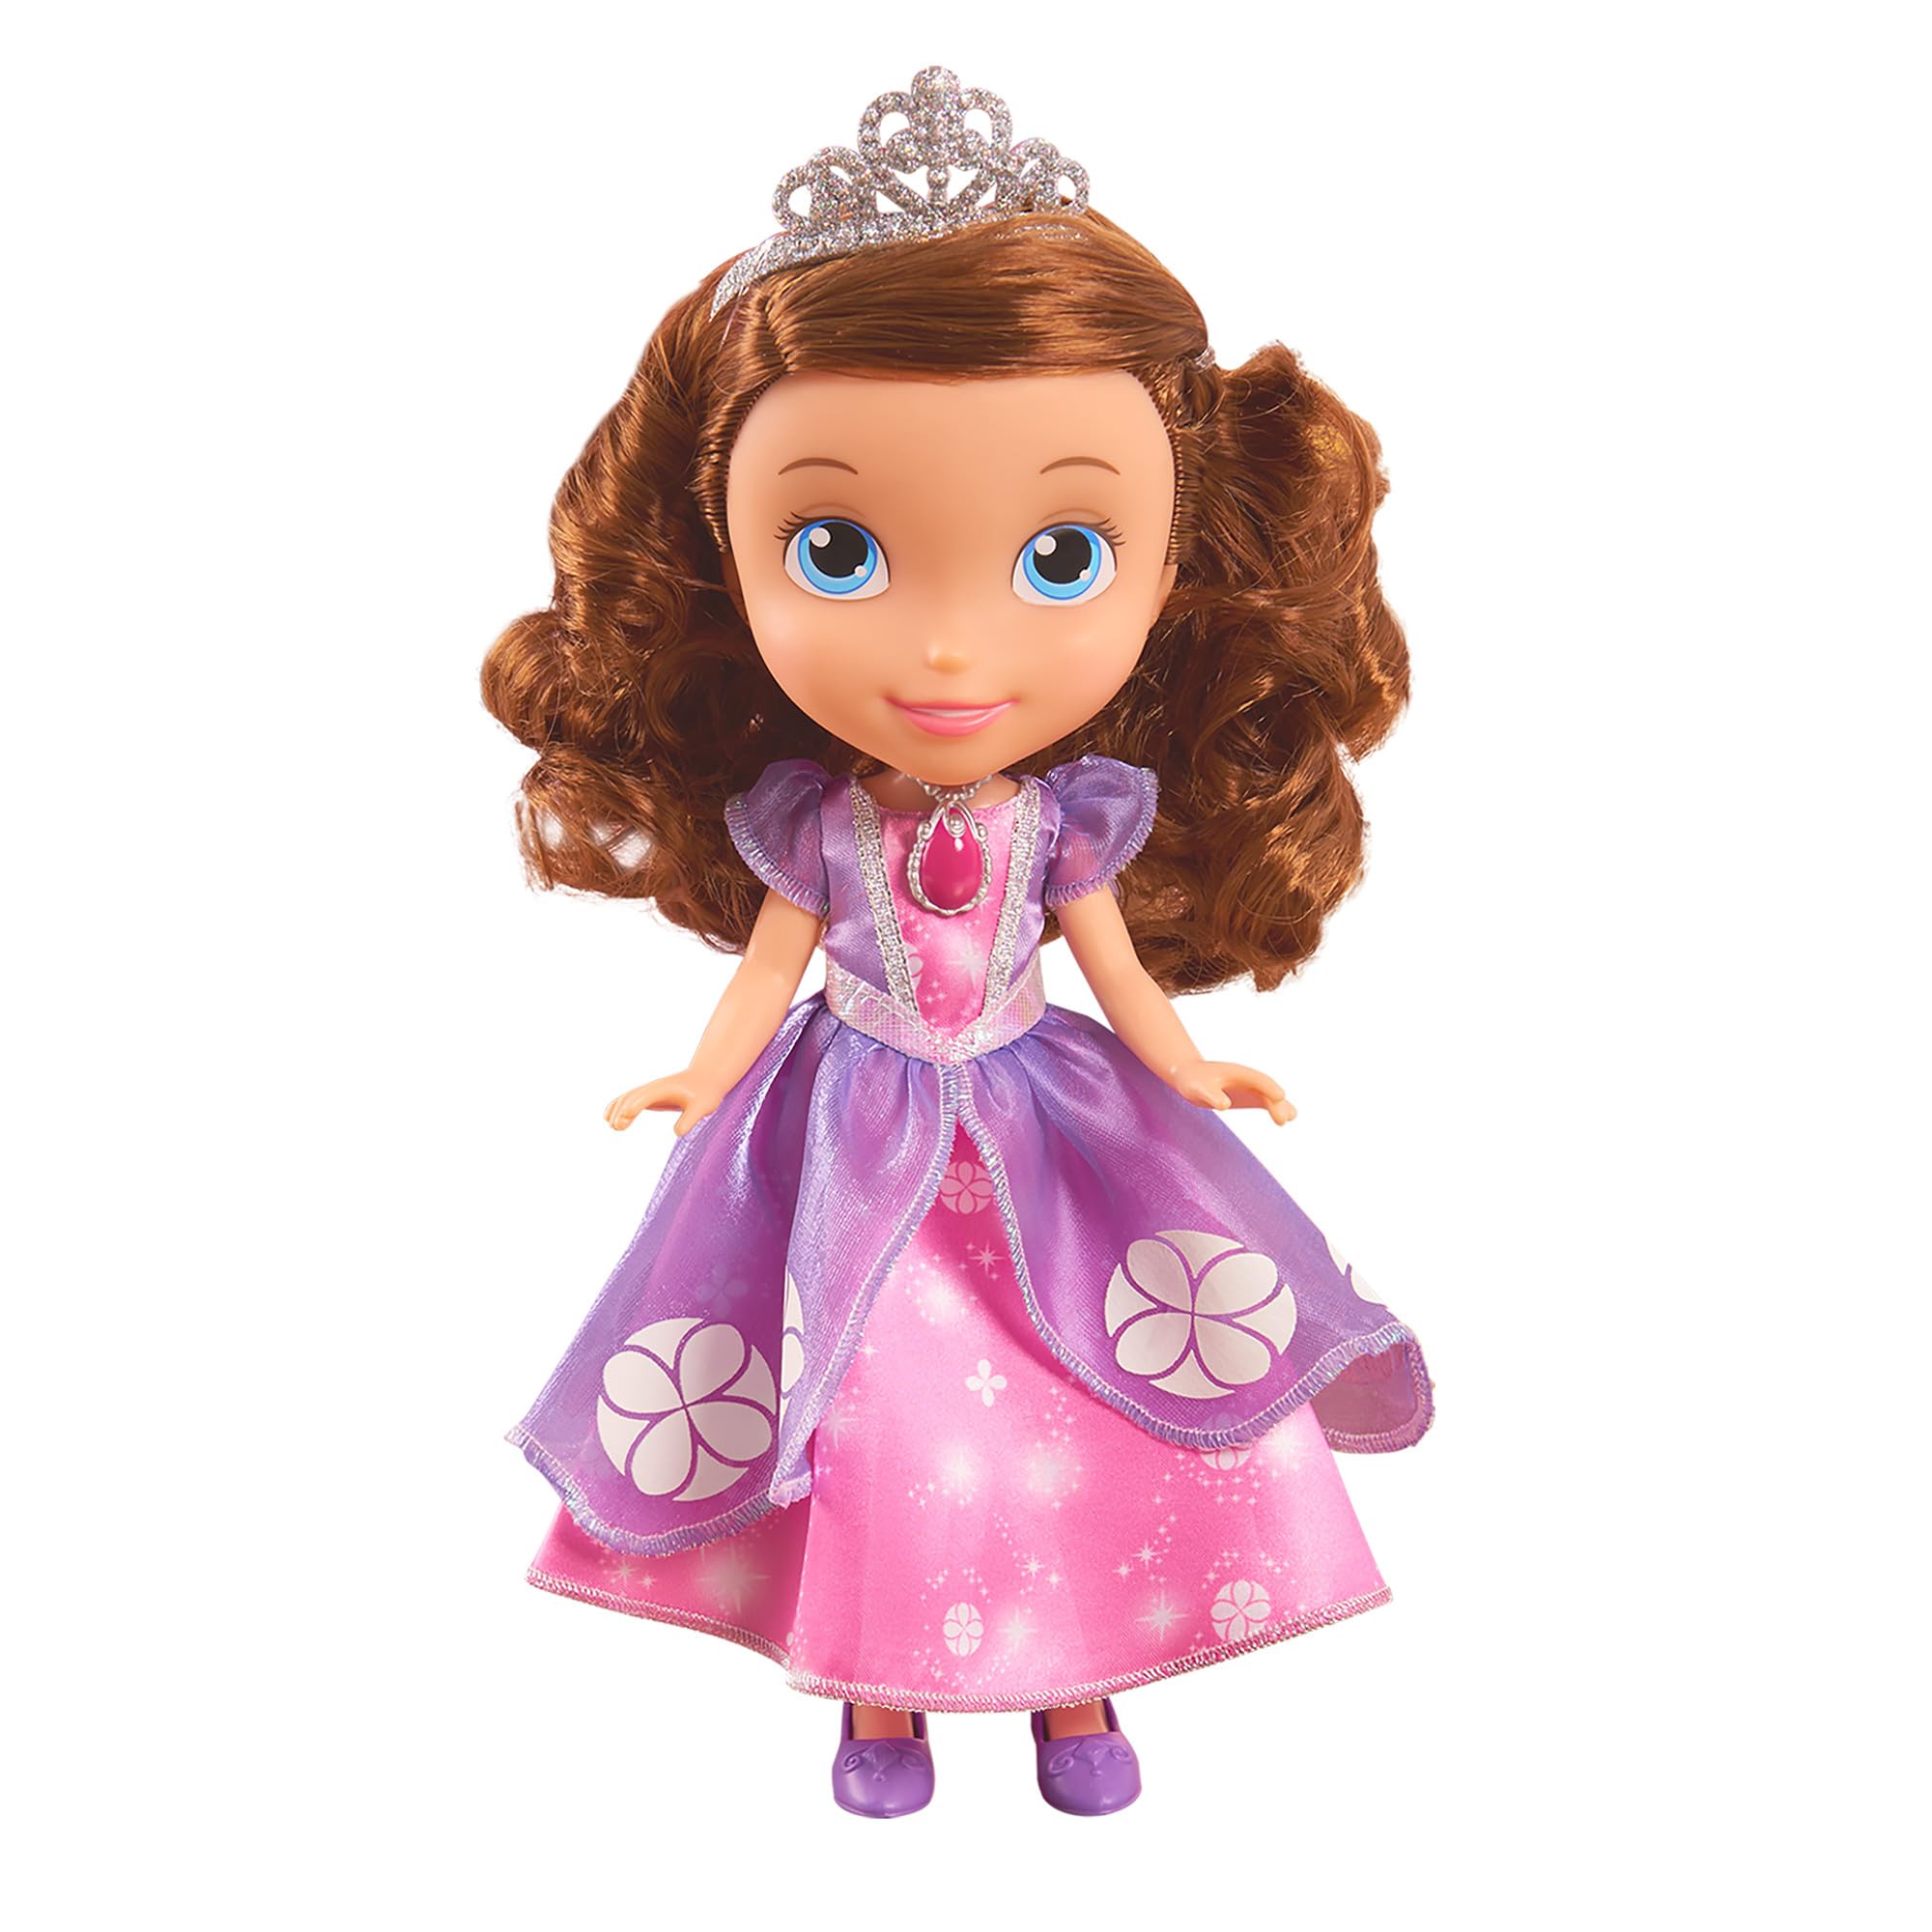 Sofia the First Royal Dolls - Sofia, Kids Toys for Ages 3 Up, Gifts and Presents by Just Play